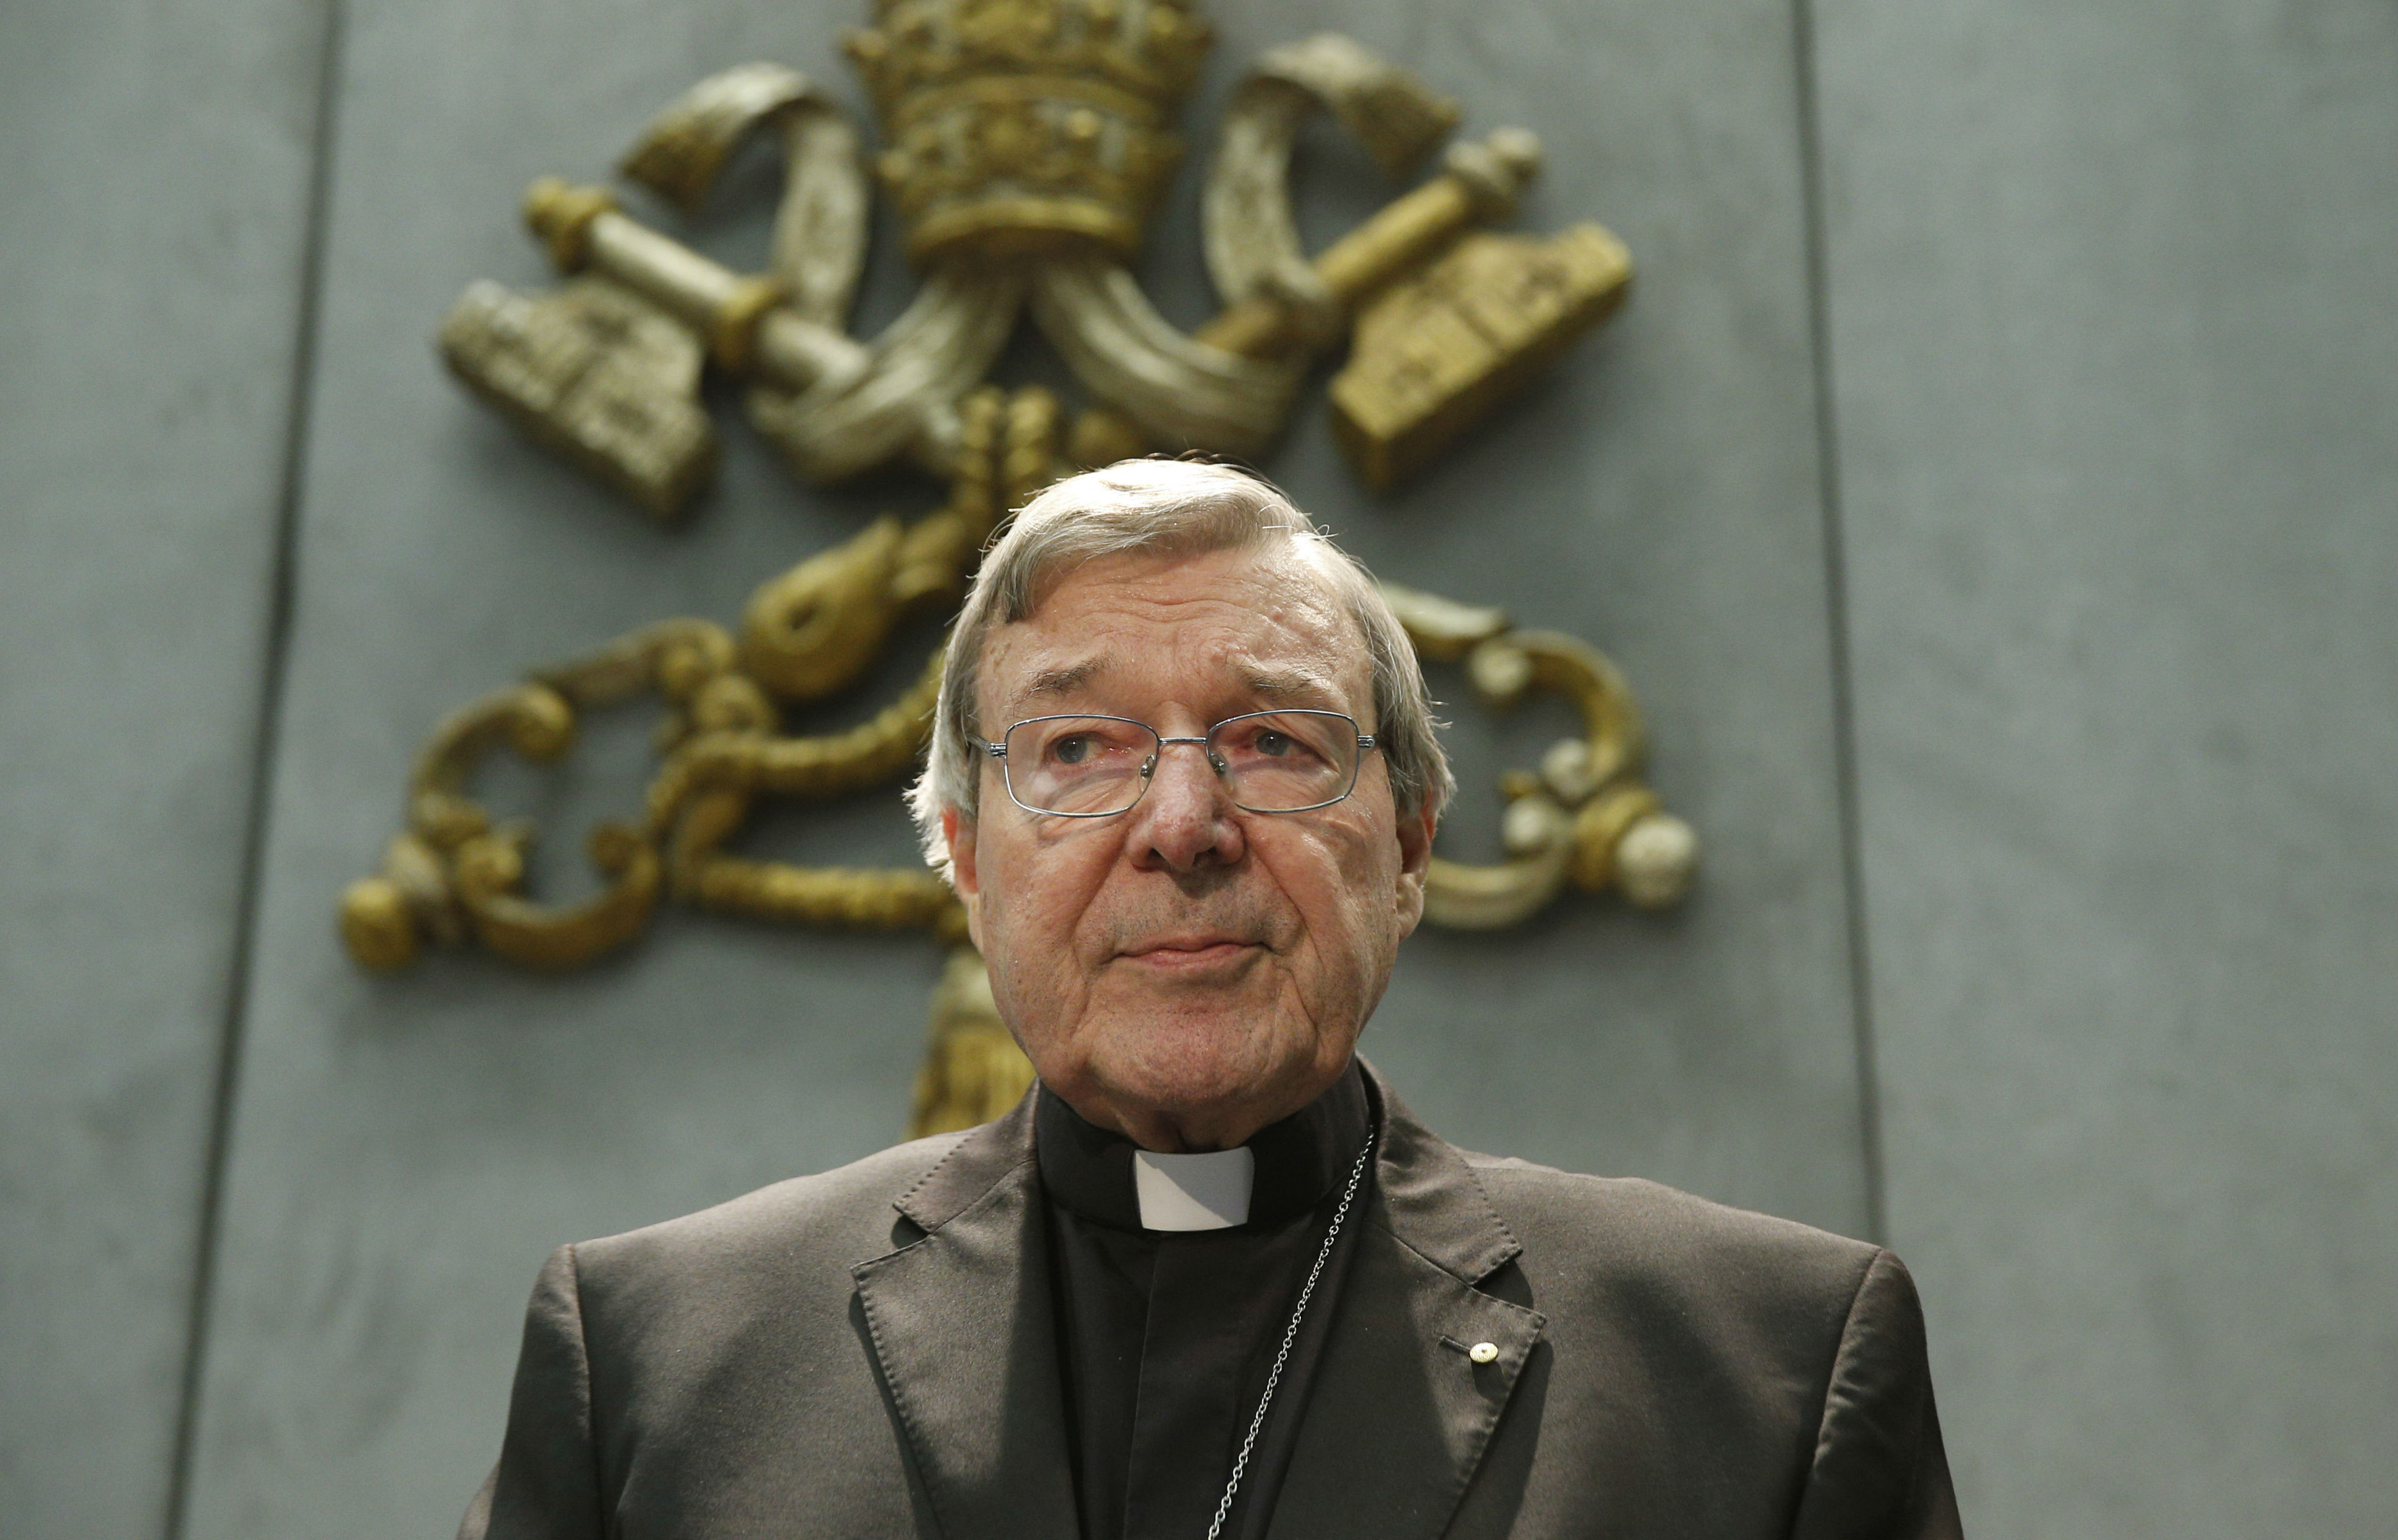 Vatican Financial Chief, Pell, takes leave of absence to fight sex abuse charges 